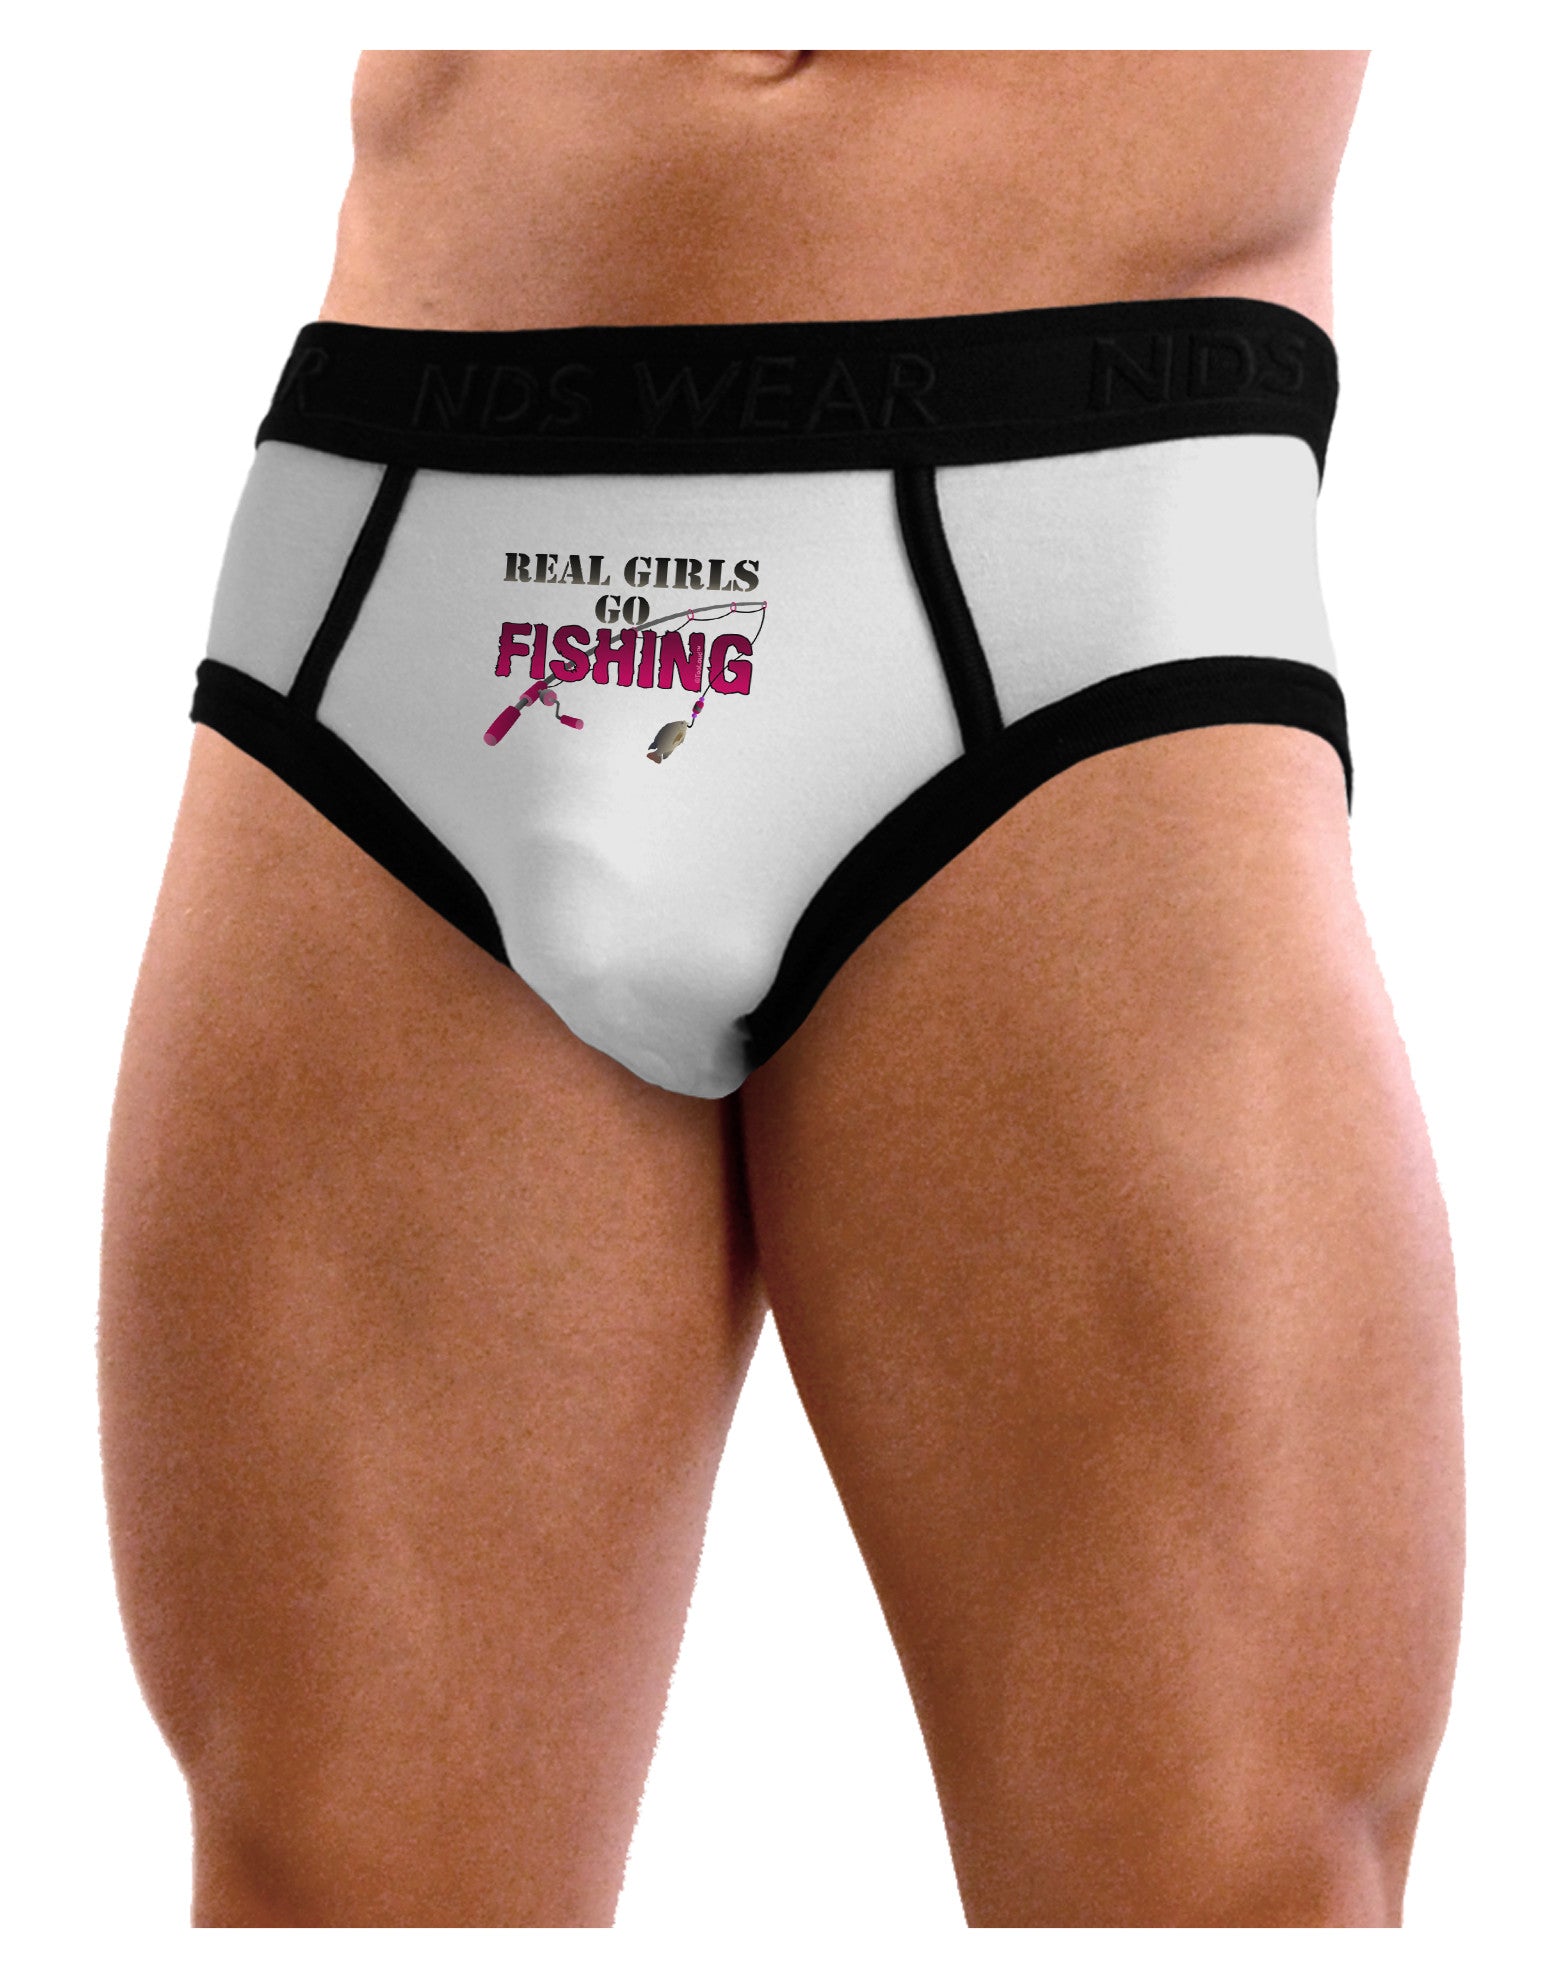 Real Girls Go Fishing Mens NDS Wear Briefs Underwear White / Large